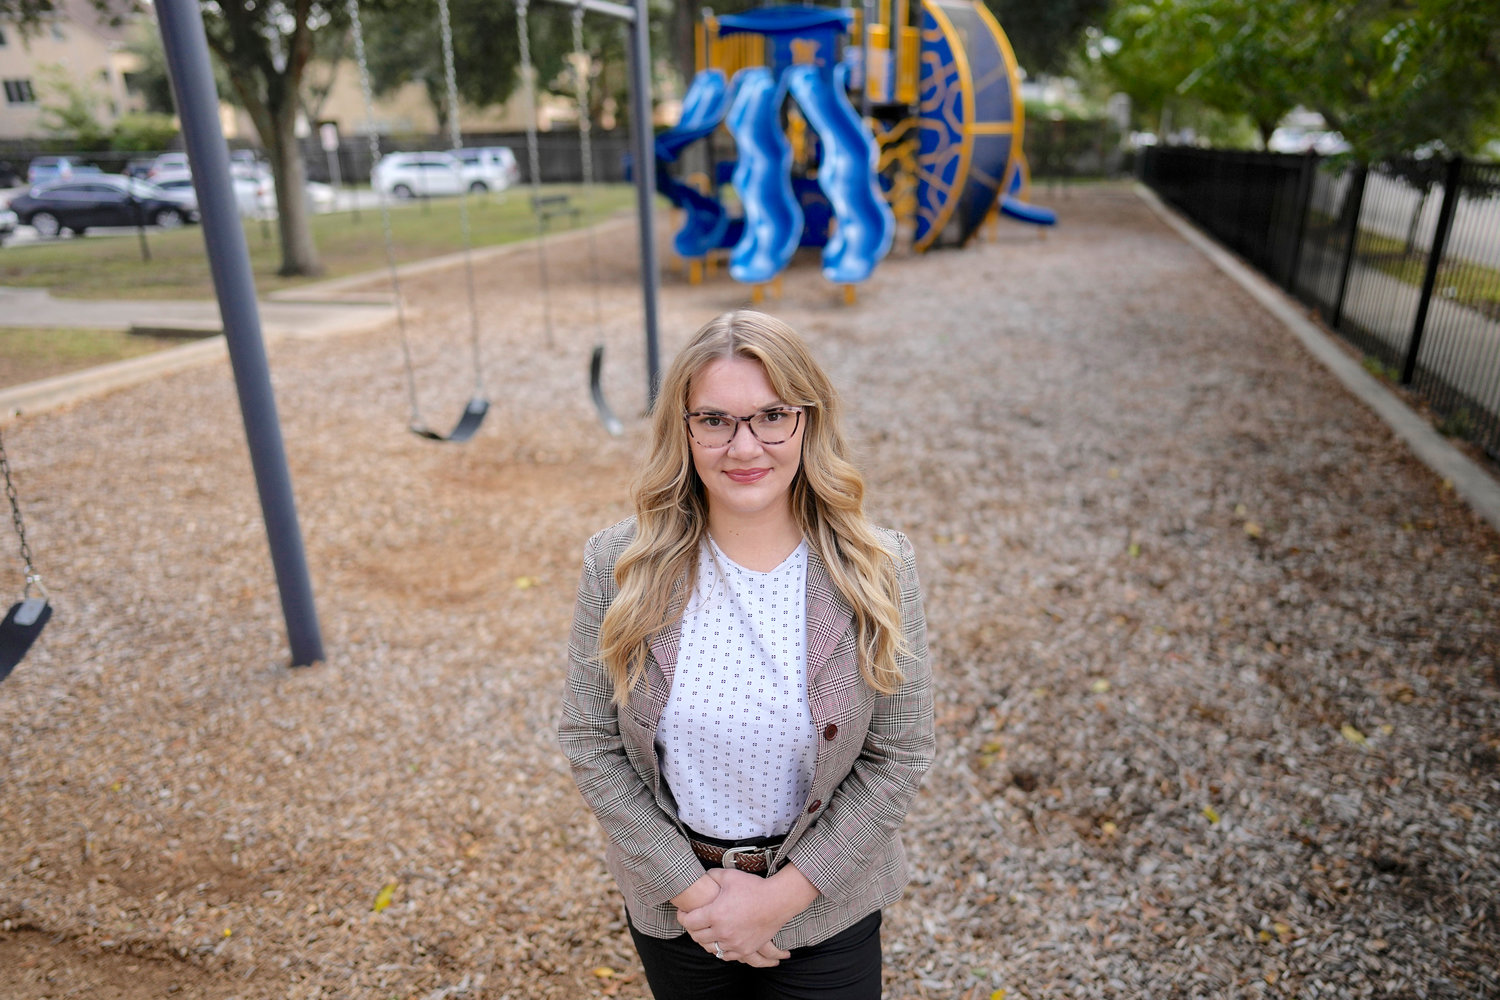 Social worker Natalie Rincon has seen firsthand the benefit of having a fuller mental health team at her elementary school, where many students are refugees or newly arrived immigrant students coping with trauma.